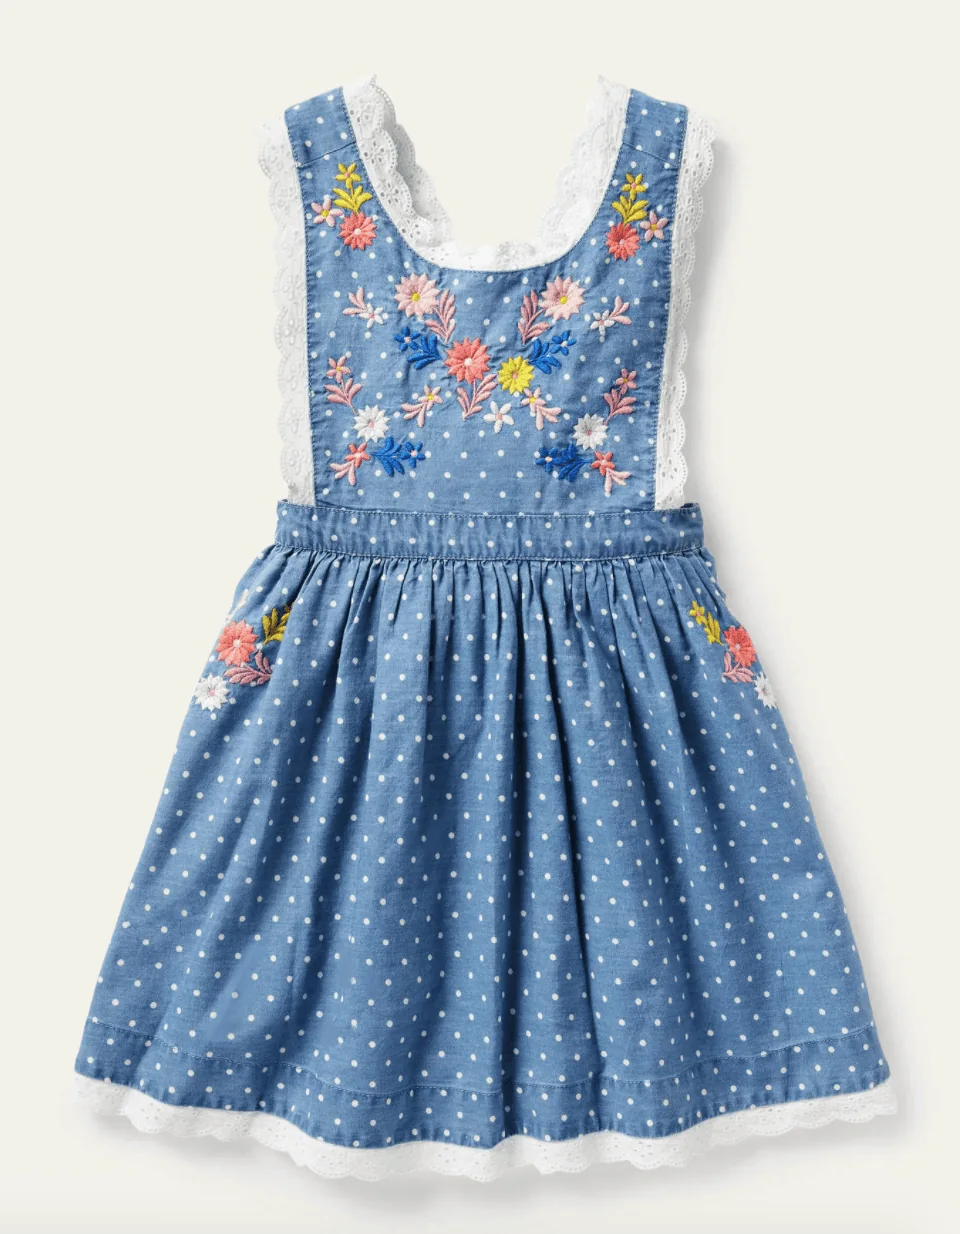 Blue swiss dot dress with colorful embroidered flowers